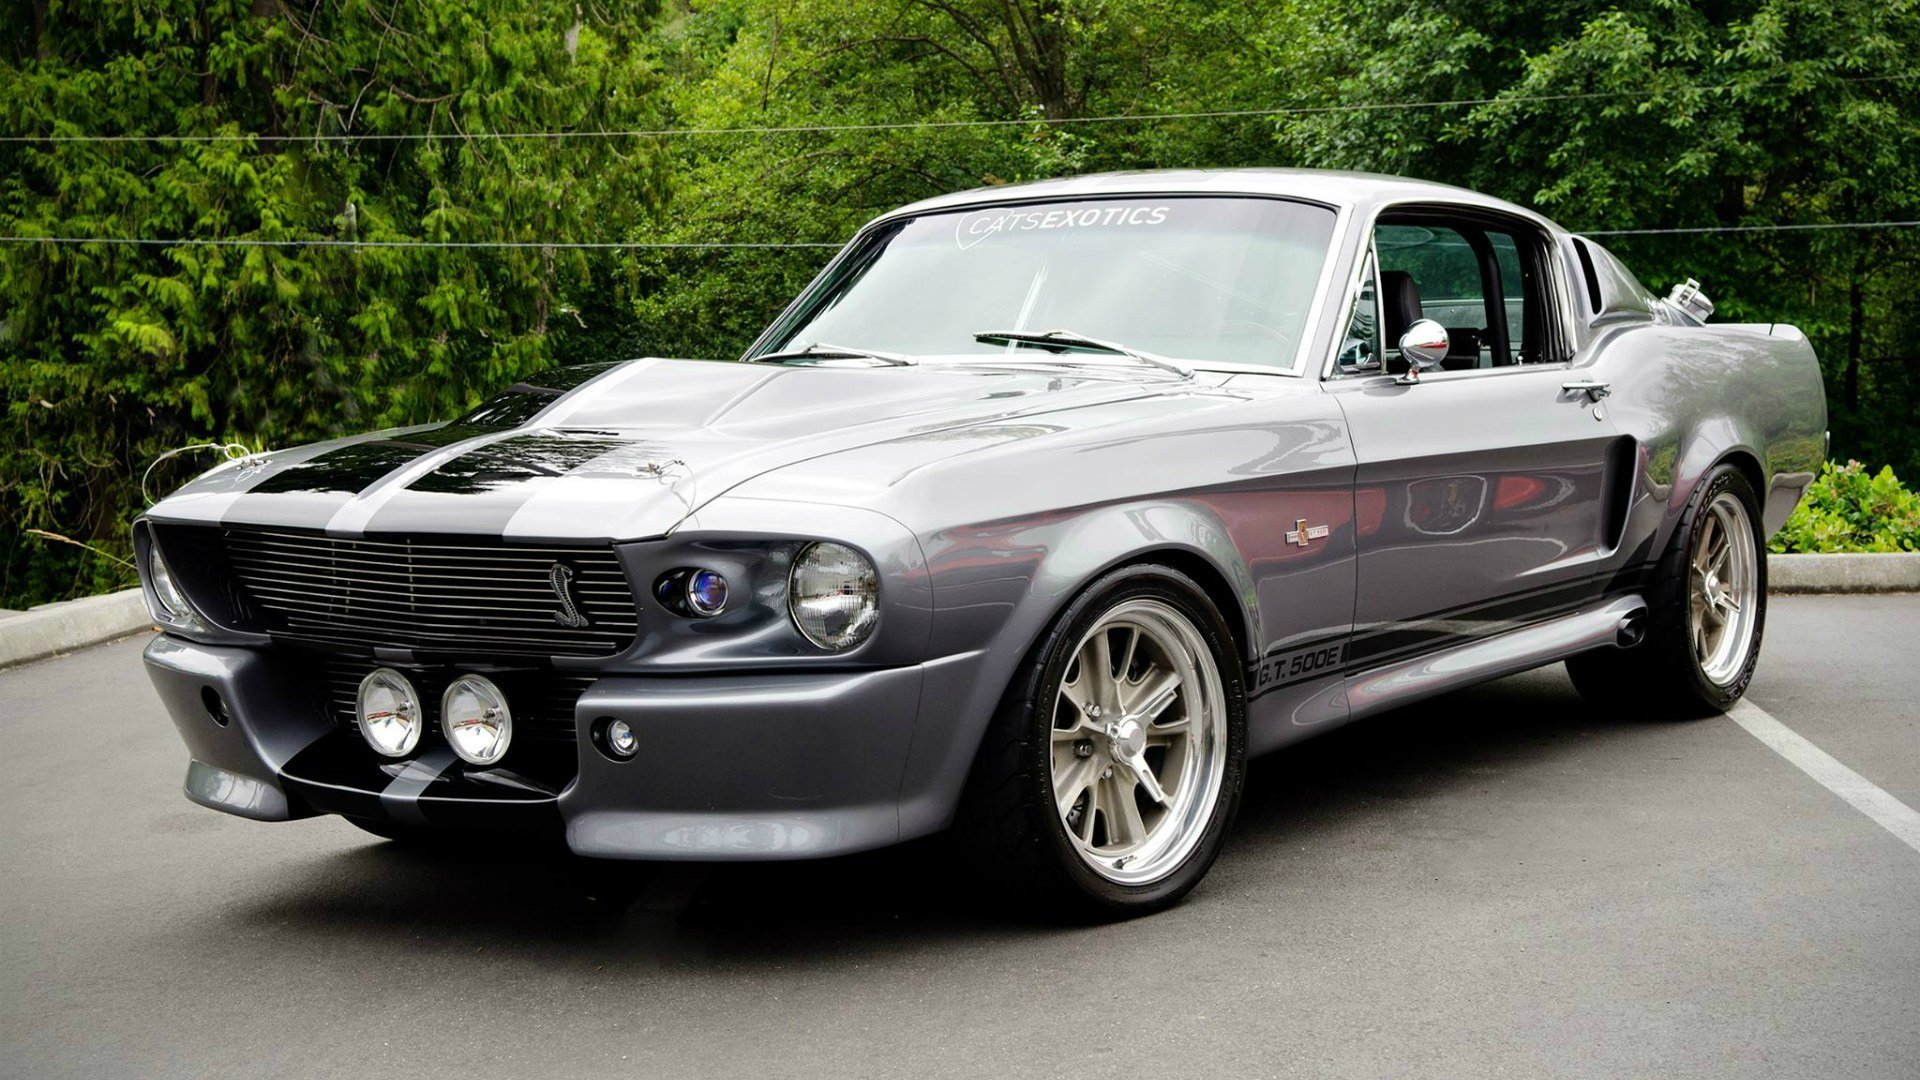 1967 Ford Mustang for Sale on ClassicCars.com - 114 Available